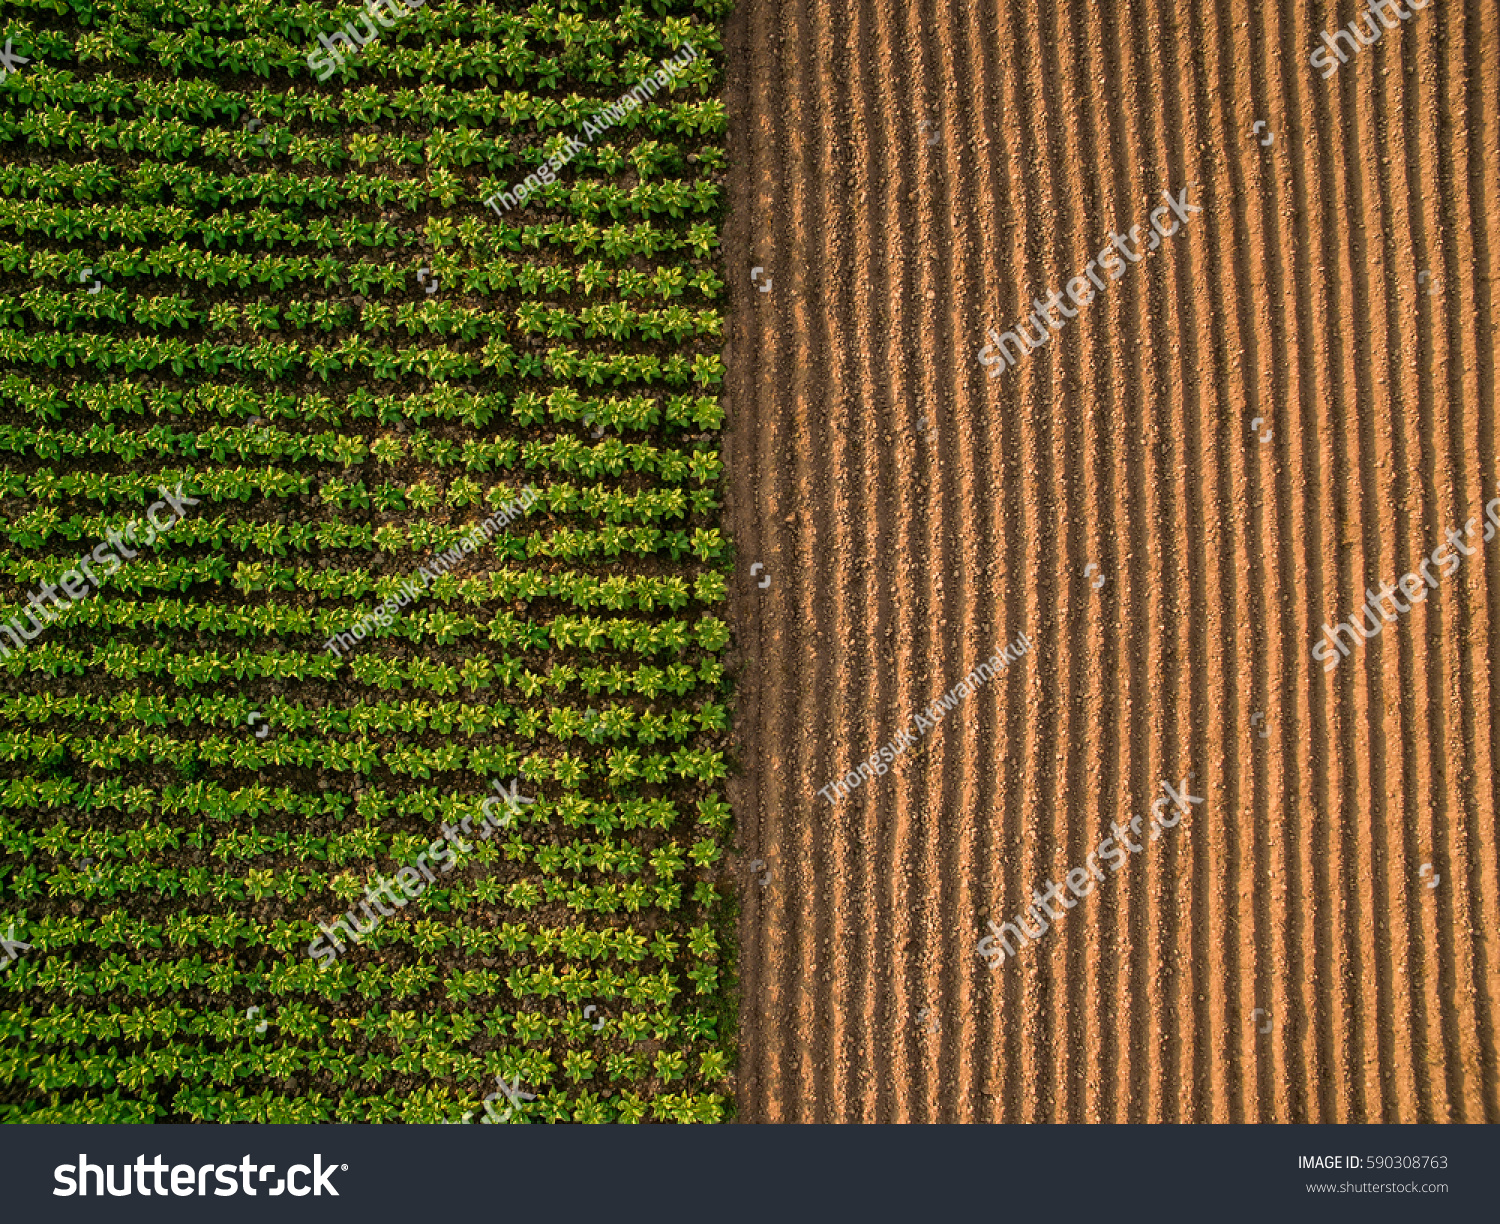 Aerial view ; Rows of soil before planting.Furrows row pattern in a plowed field prepared for planting crops in spring.Horizontal view in perspective. #590308763